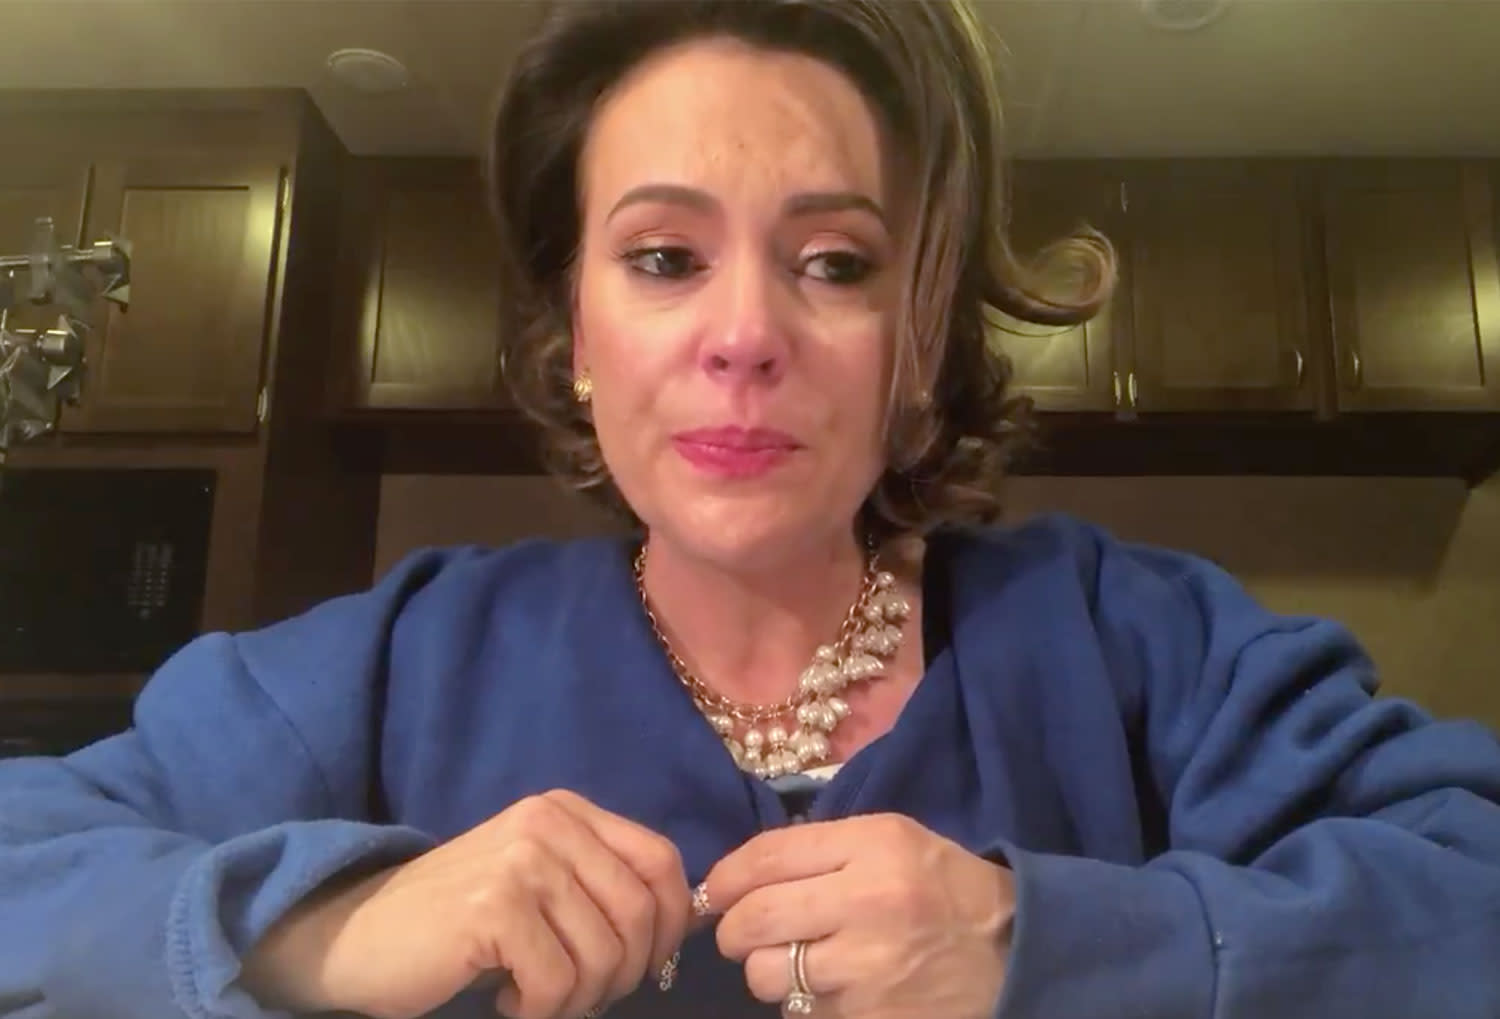 Alyssa Milano Cries As She Tells Her Daughter Why She Came Forward